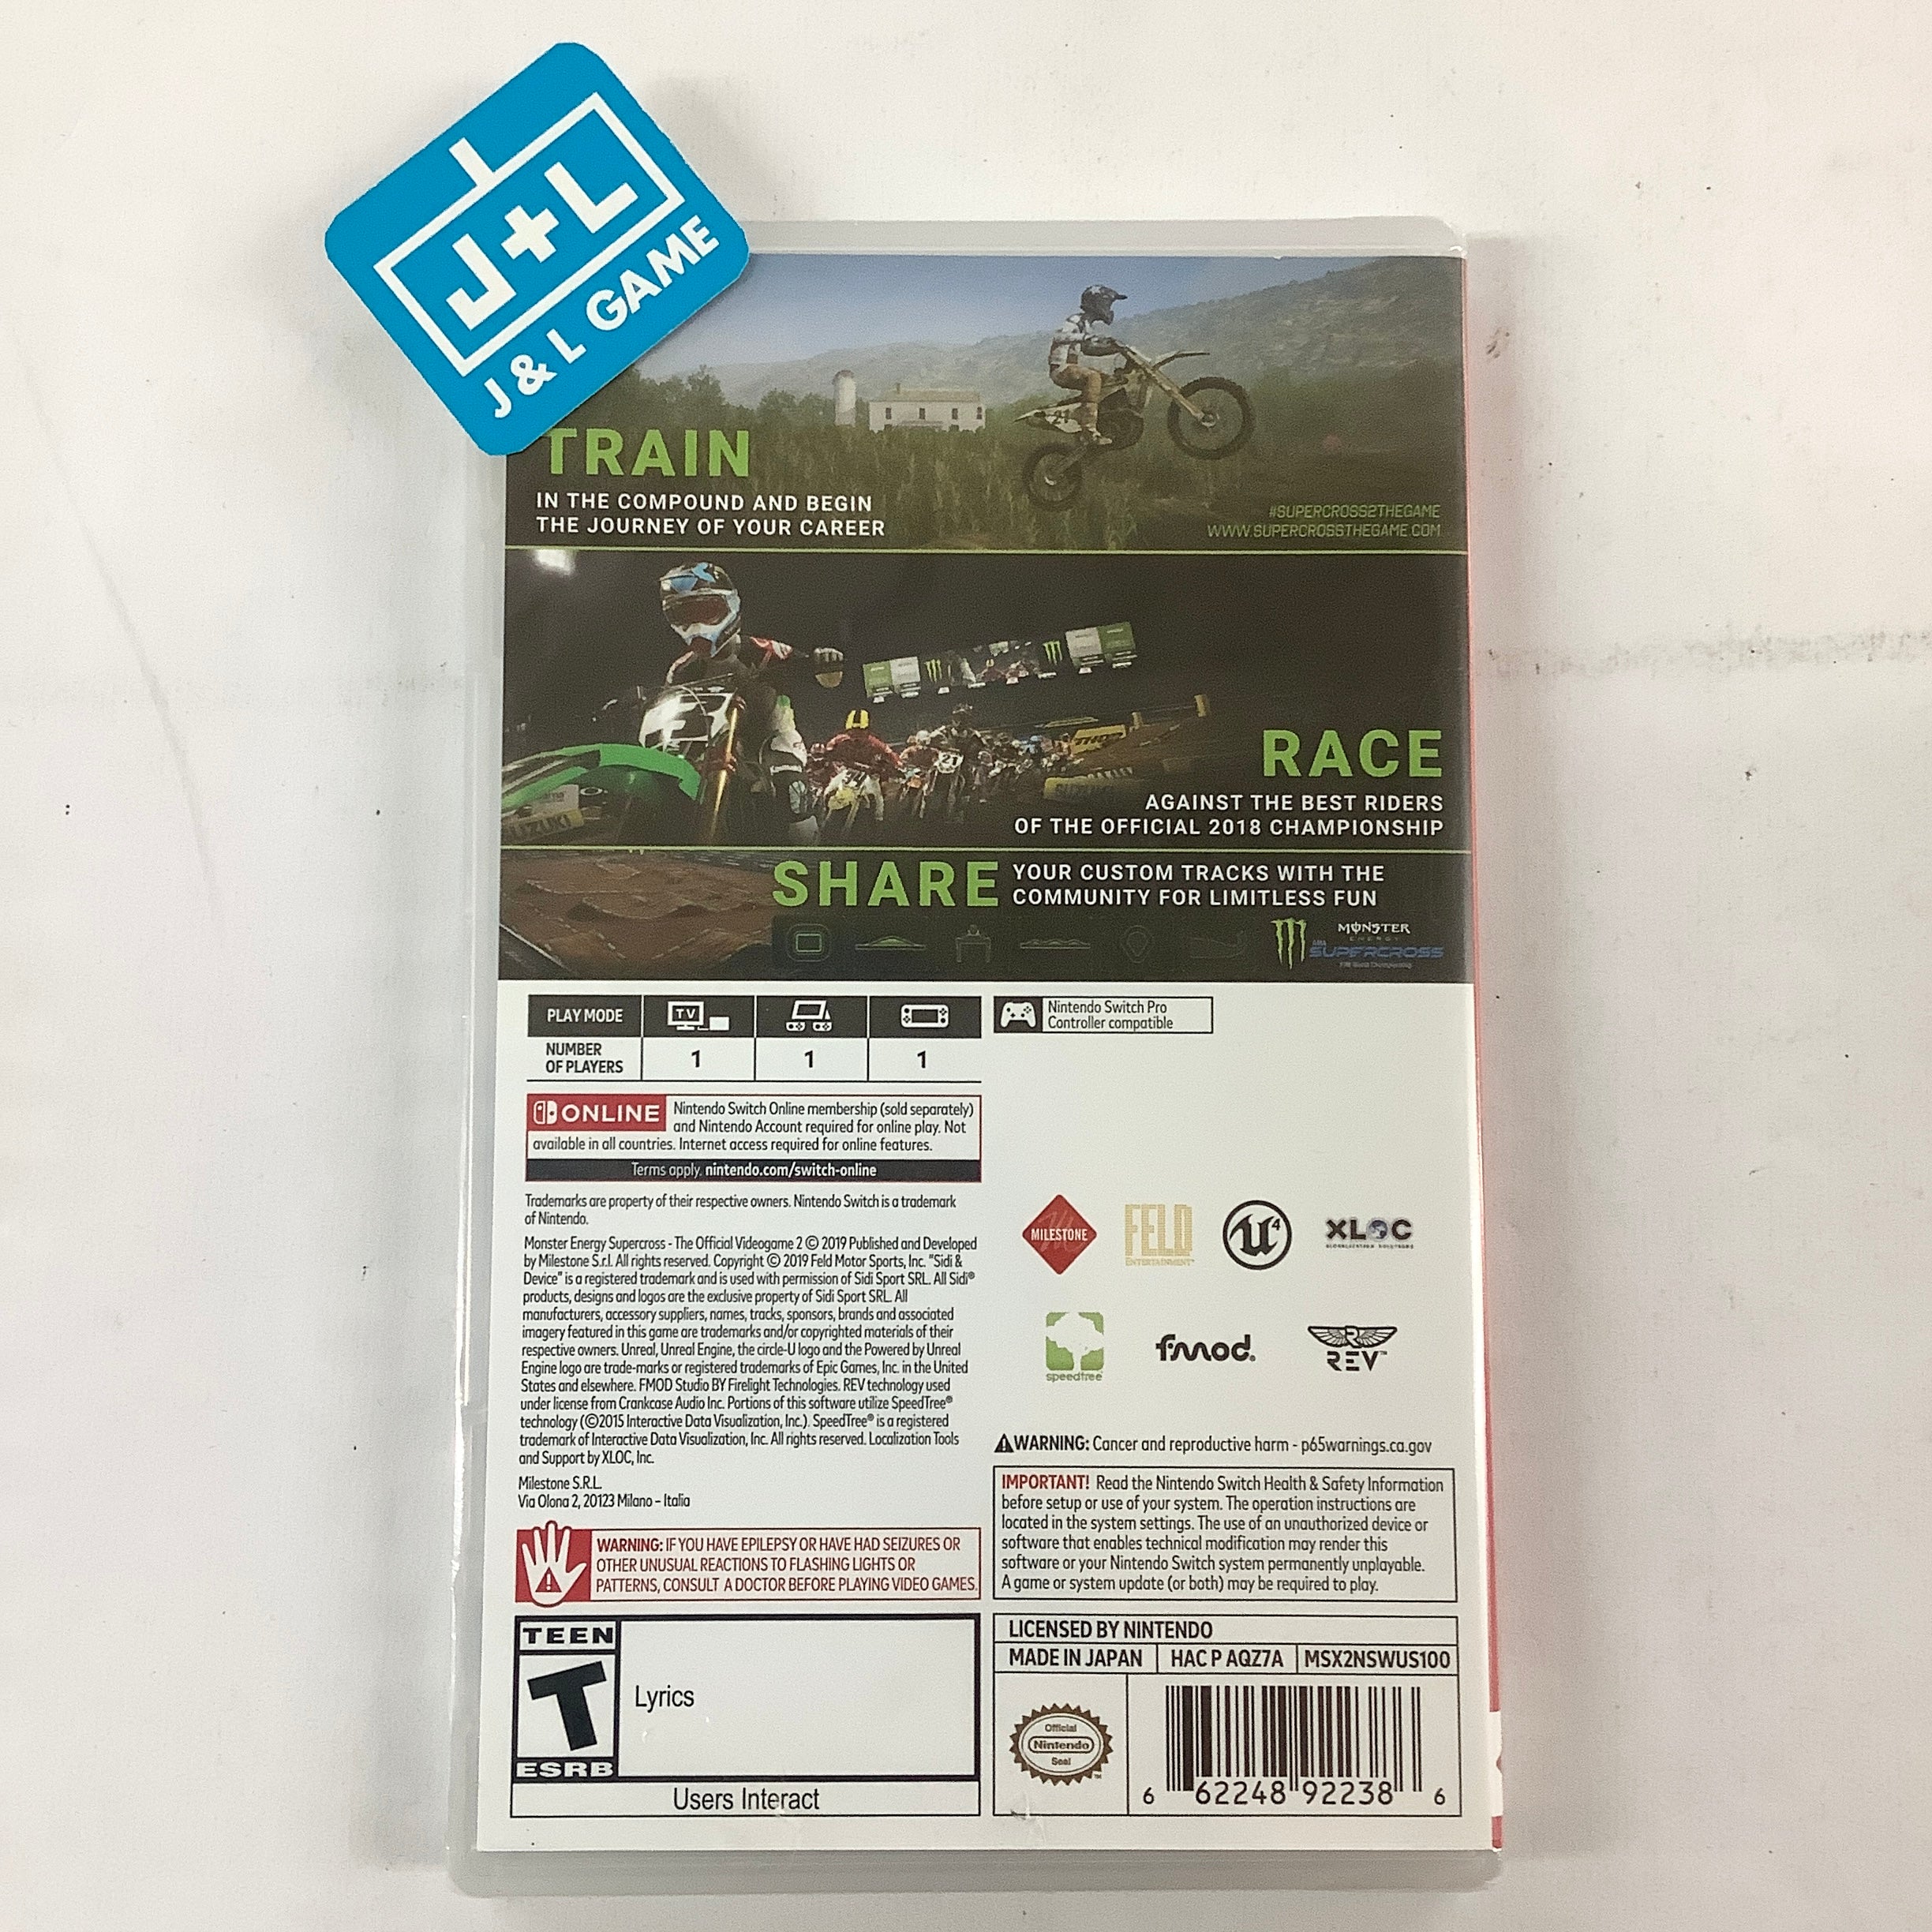 Monster Energy Supercross - The Official Videogame 2 - (NSW) Nintendo Switch Video Games Milestone S.r.l   